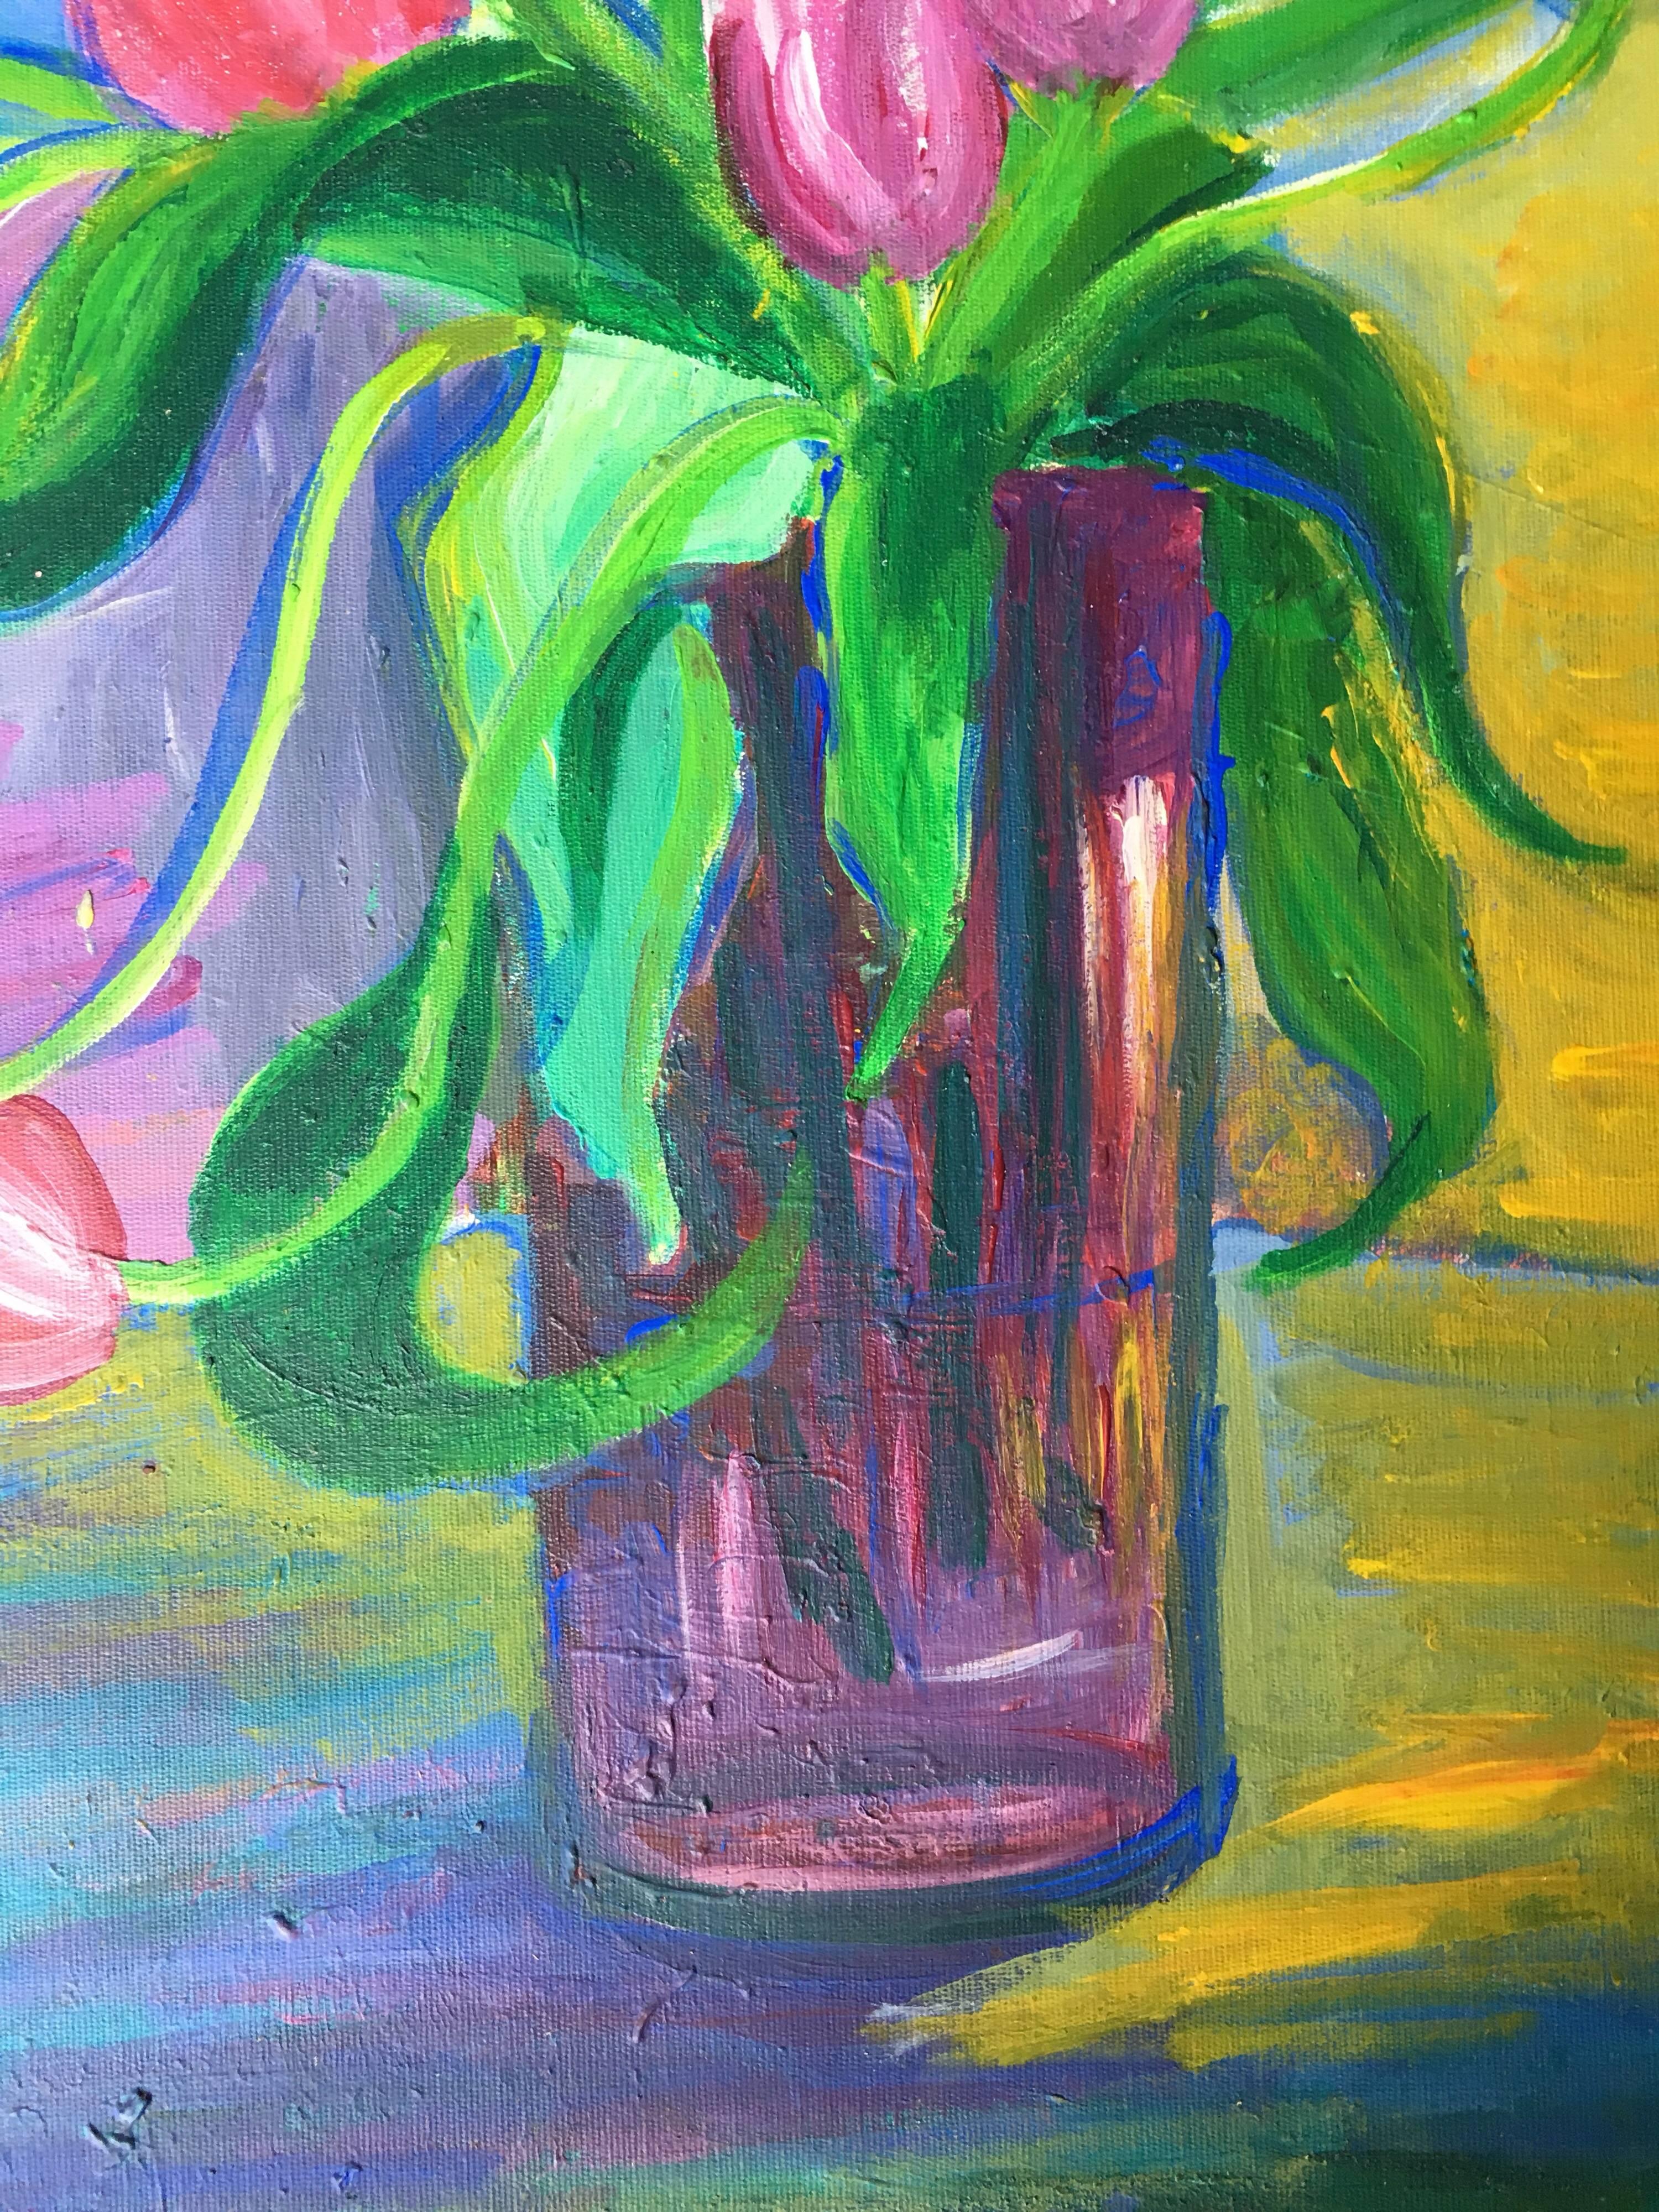 Abstract Vase of Tulips, Colourful Oil Painting - Gray Still-Life Painting by Pamela Cawley